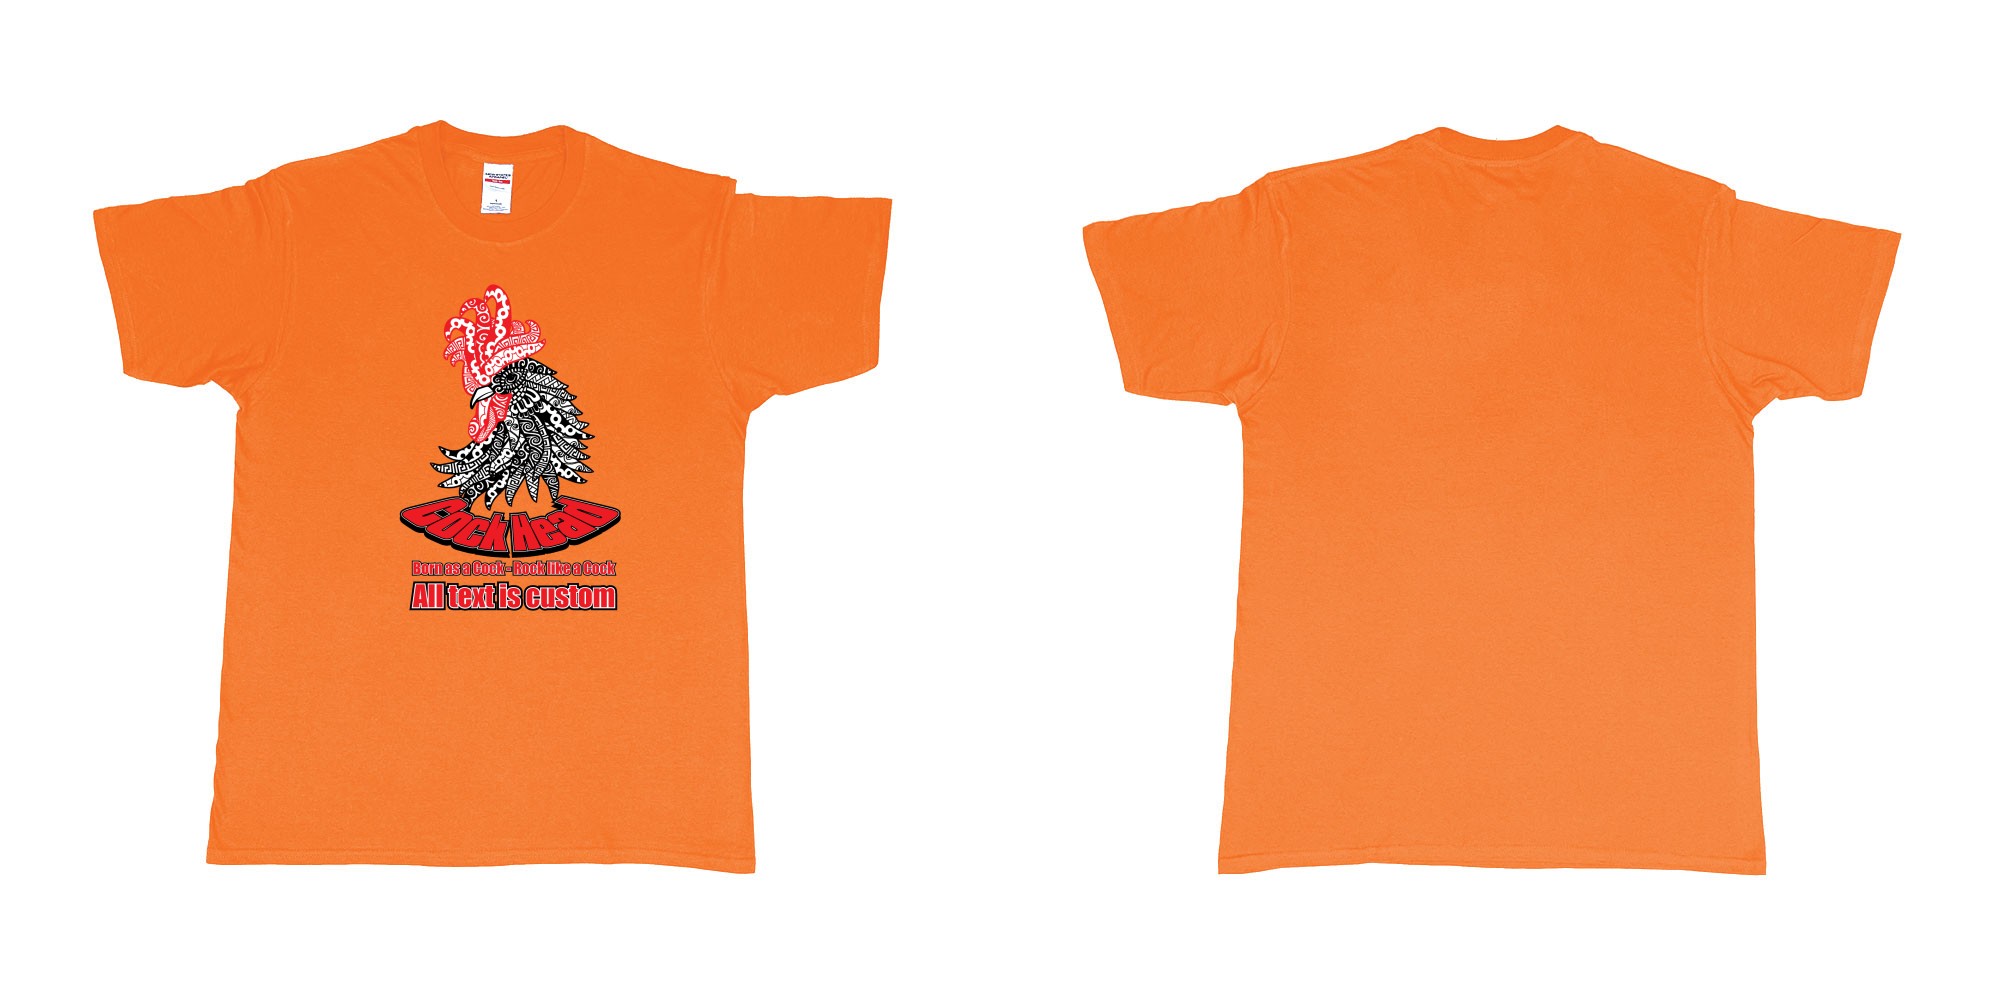 Custom tshirt design cock head rooster zodiac sign in fabric color orange choice your own text made in Bali by The Pirate Way